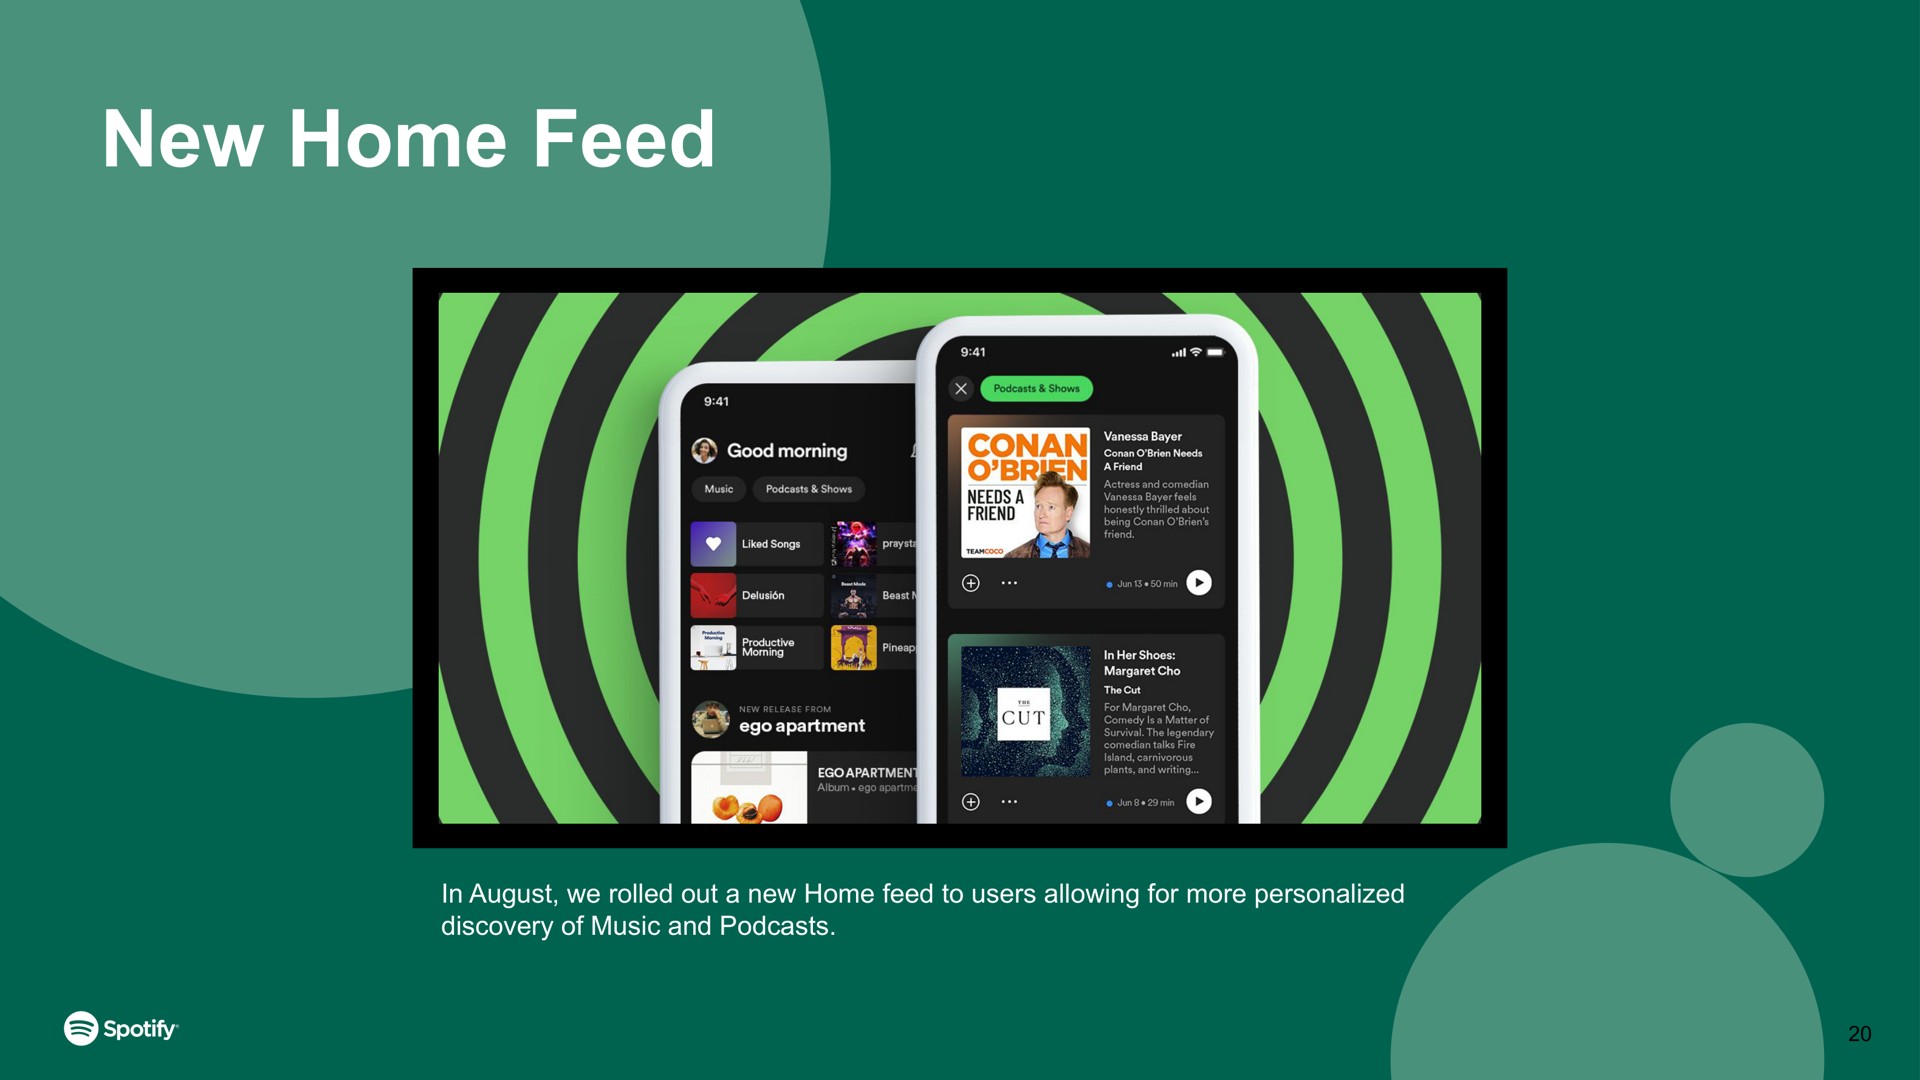 new home feed in august we rolled out a to users allowing for more personalized | Spotify